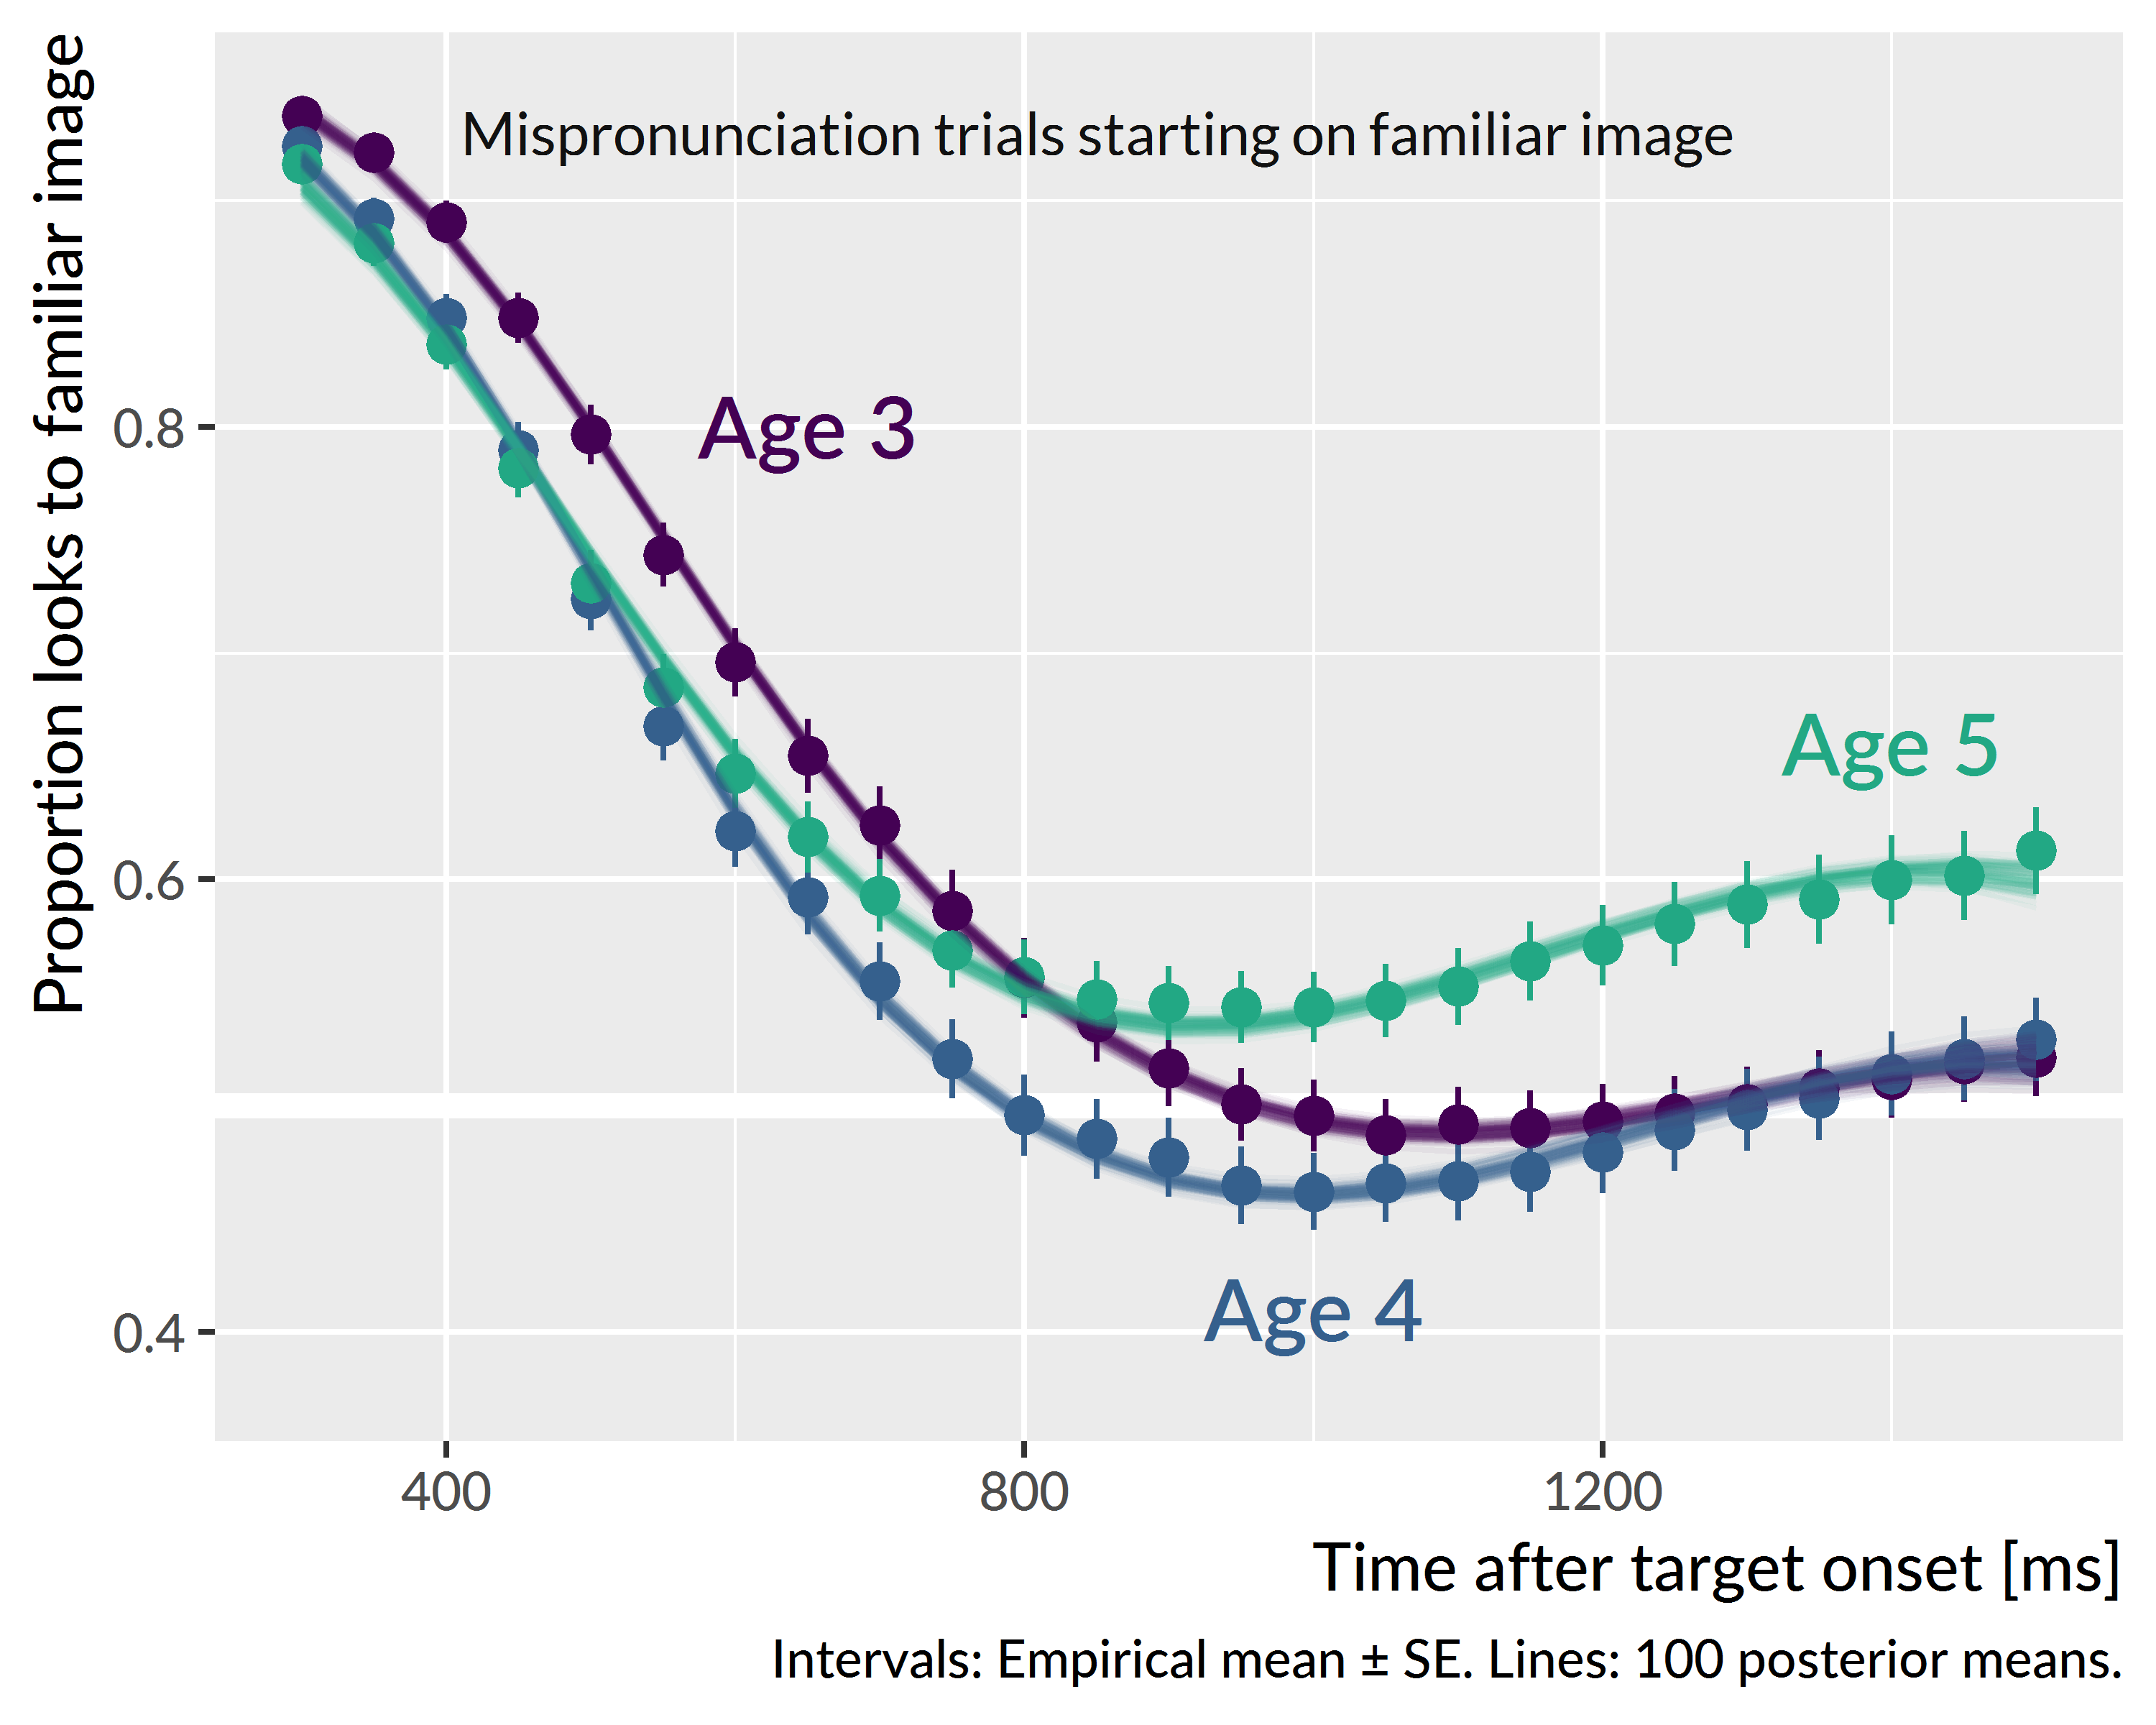 Average looks to familiar image for mispronunciation trials starting on the familiar image at each age. Lines represent 100 posterior predictions of the group average (the average of participants’ individual growth curves).